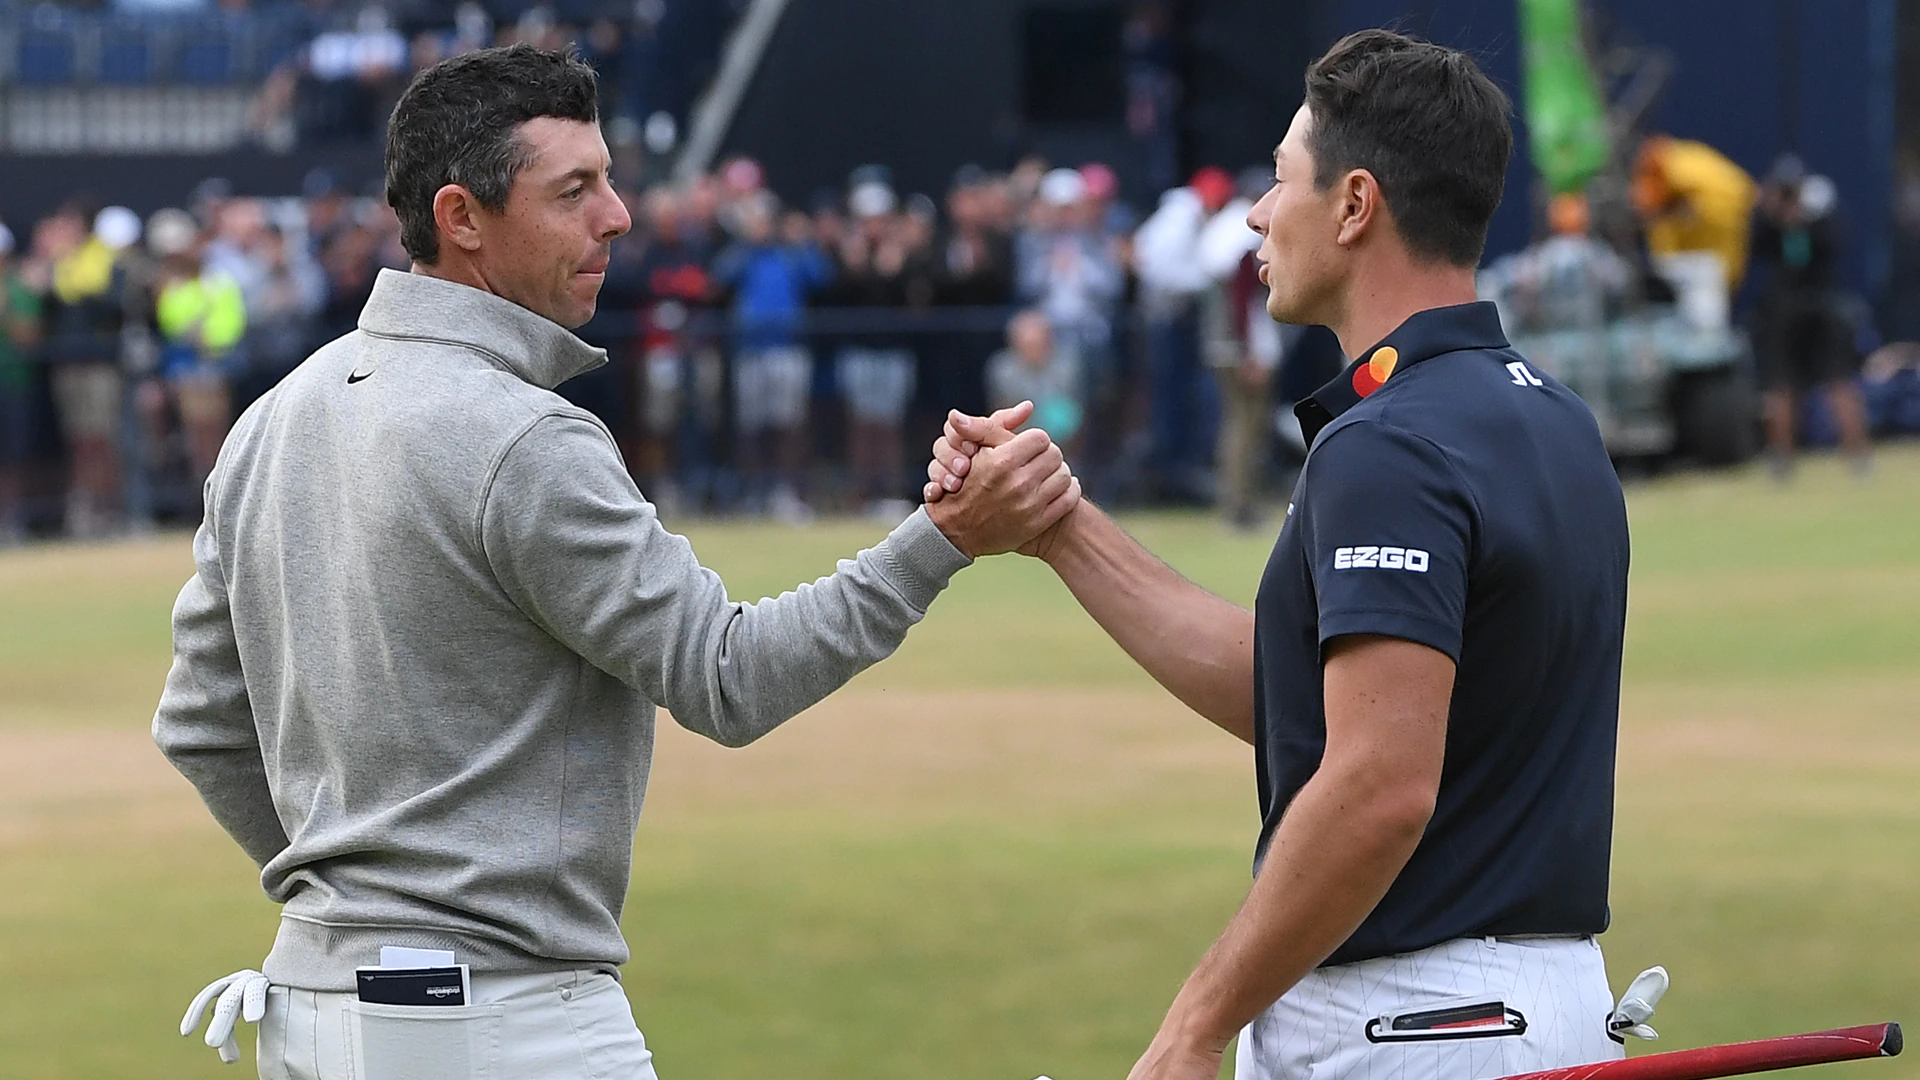 2022 British Open: Rory McIlroy, Viktor Hovland together again Sunday at St. Andrews